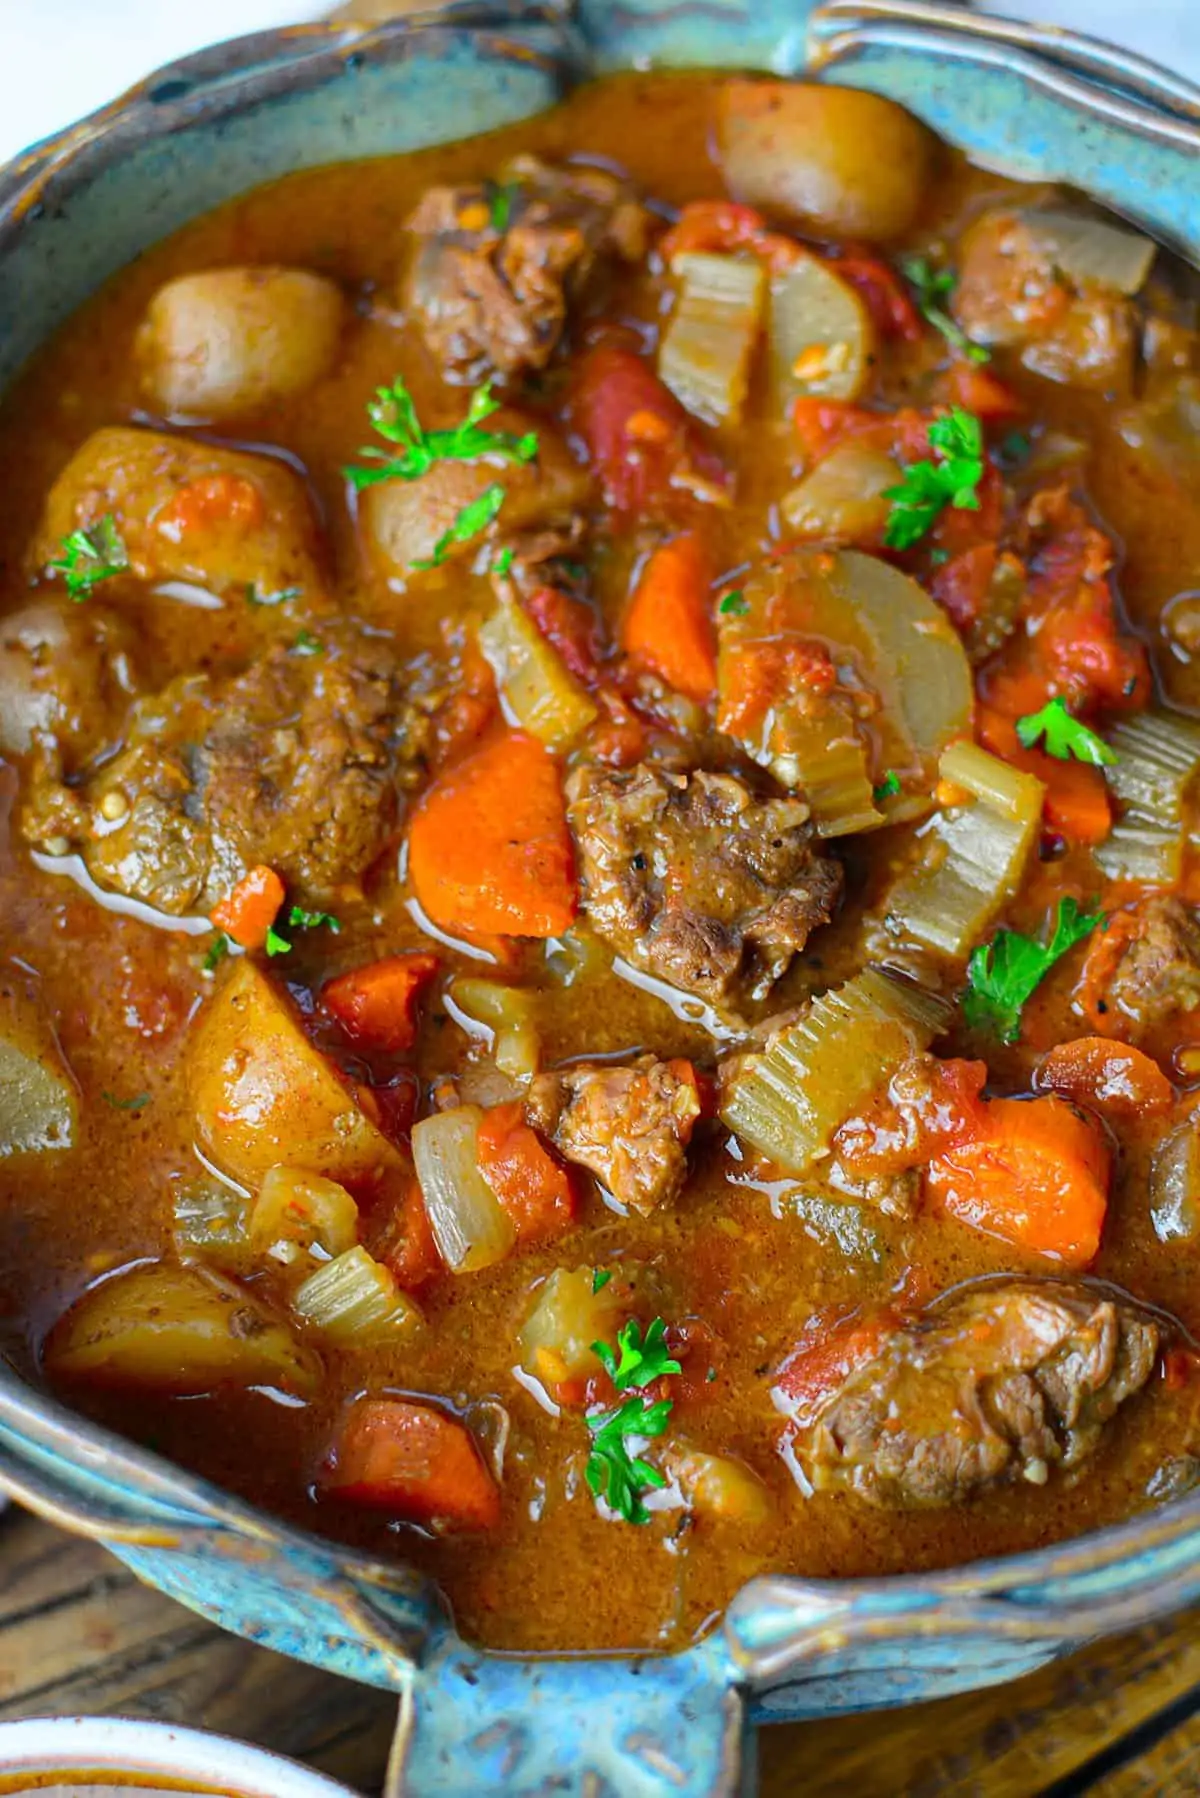 Beef stew in a blue bowl on a wooden board background.